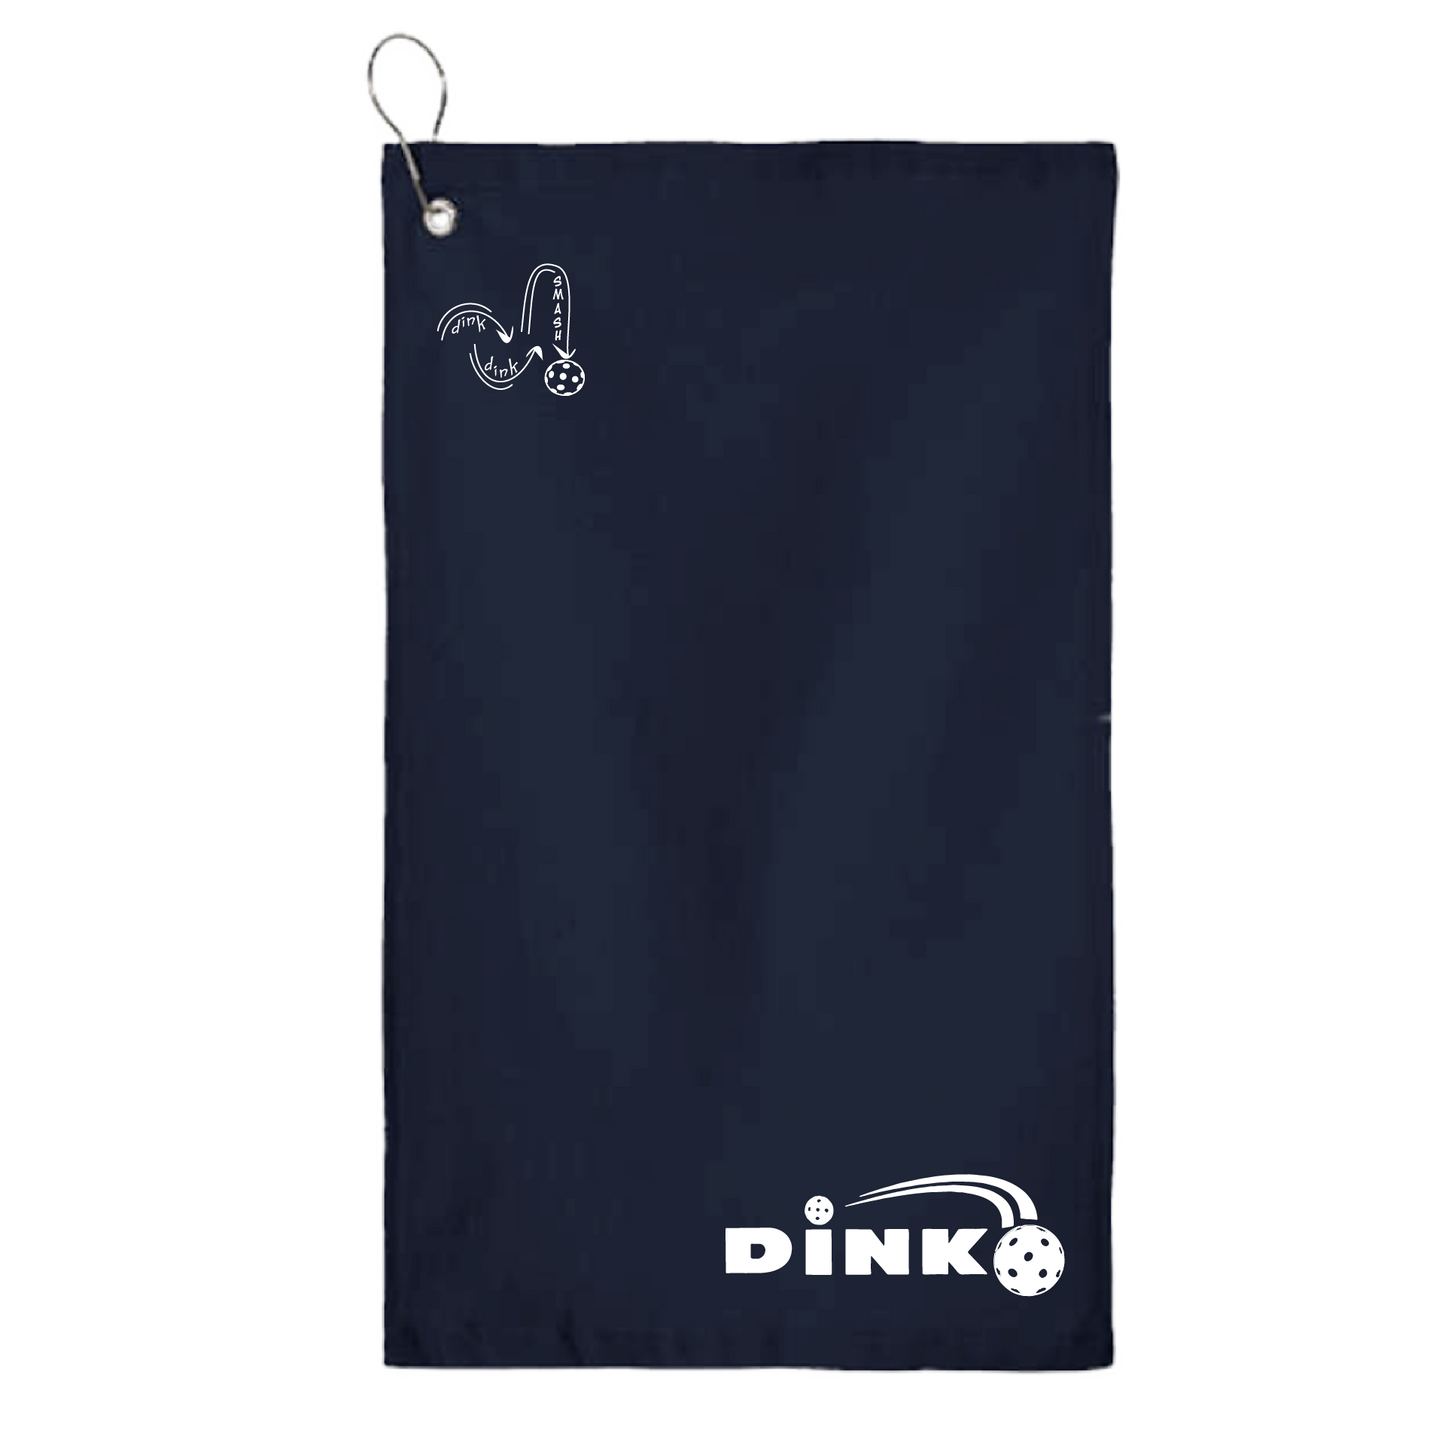 This Dink design pickleball towel is crafted with cotton terry velour for optimal performance. It features grommets, hooks, and hemmed edges for added durability. It's perfect for completing your pickleball gear, and an ideal gift for friends and tournaments. The towel is designed to be both absorbent and lightweight, so you can remain dry and comfortable while you play.